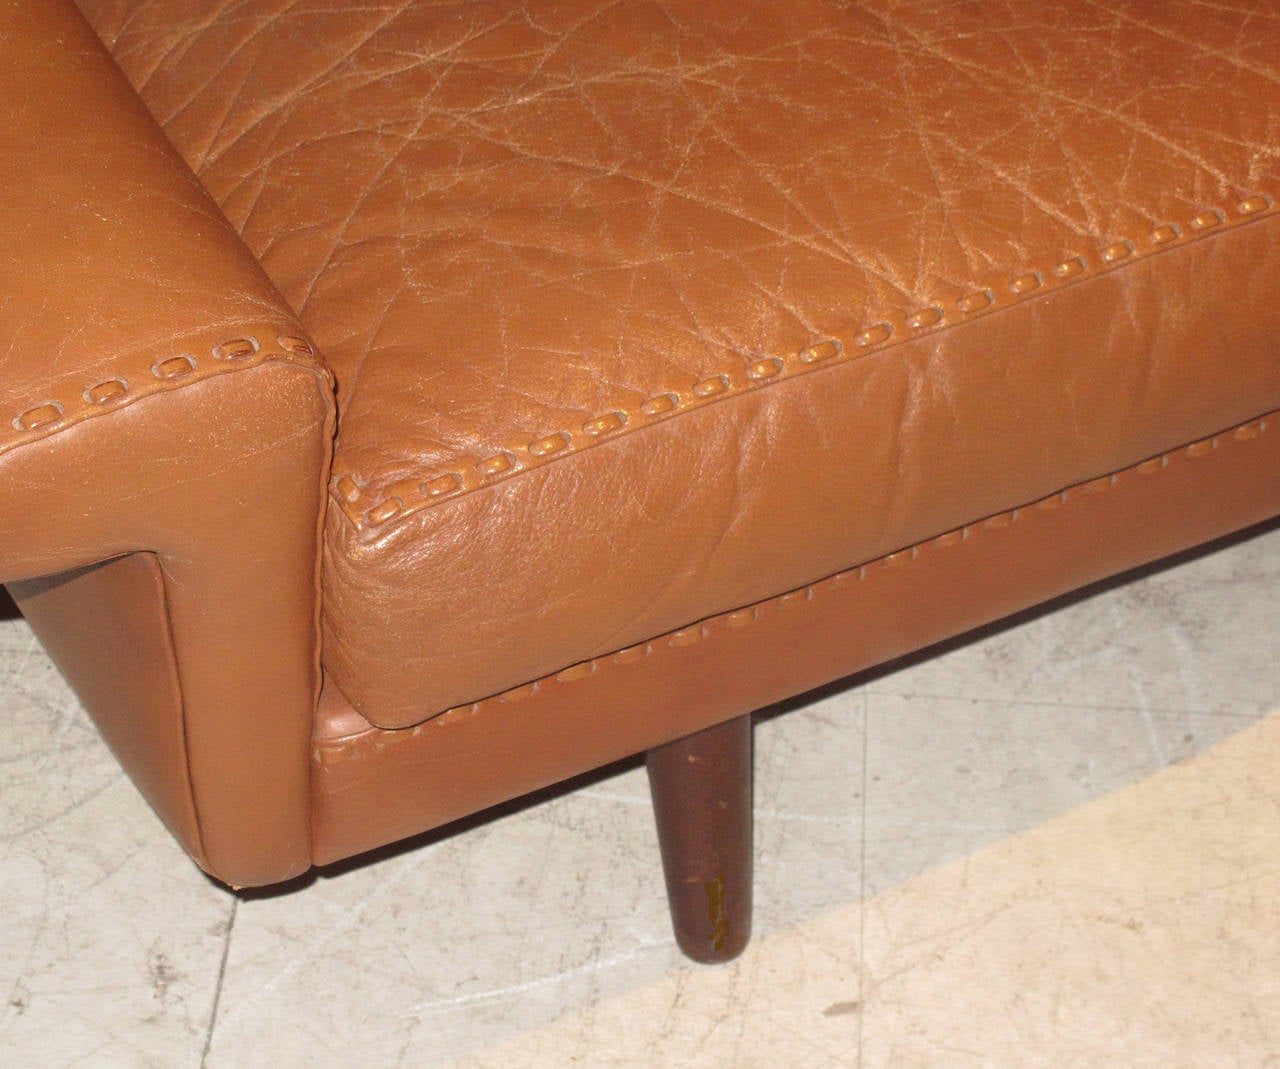 Mid-20th Century Danish Modern Leather Sofa with Stitching Detail